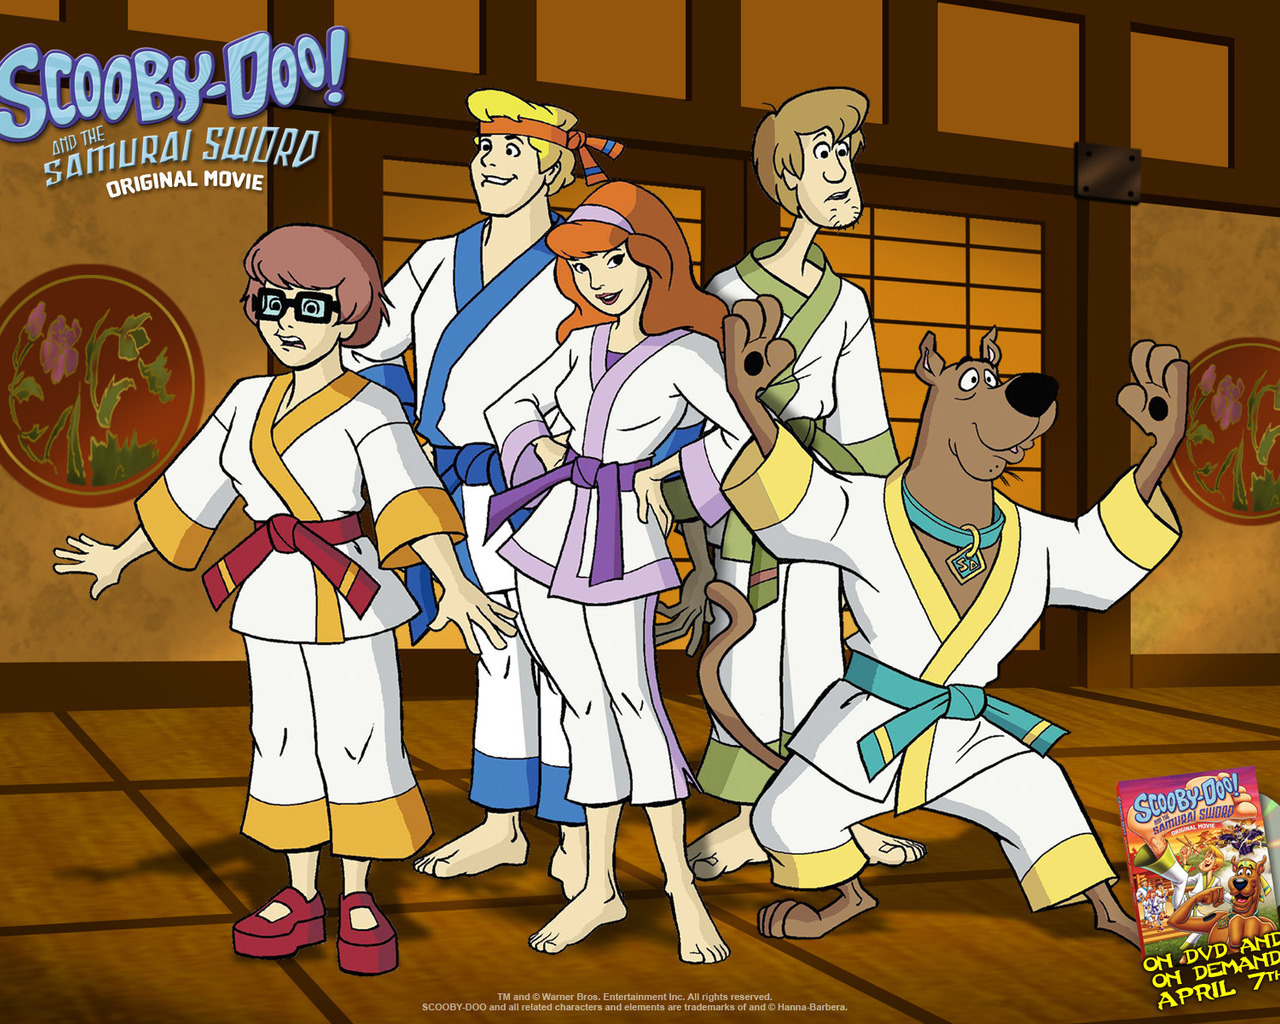 Pictures Scooby Doo And The Samurai Sword Wallpaper High Resolution